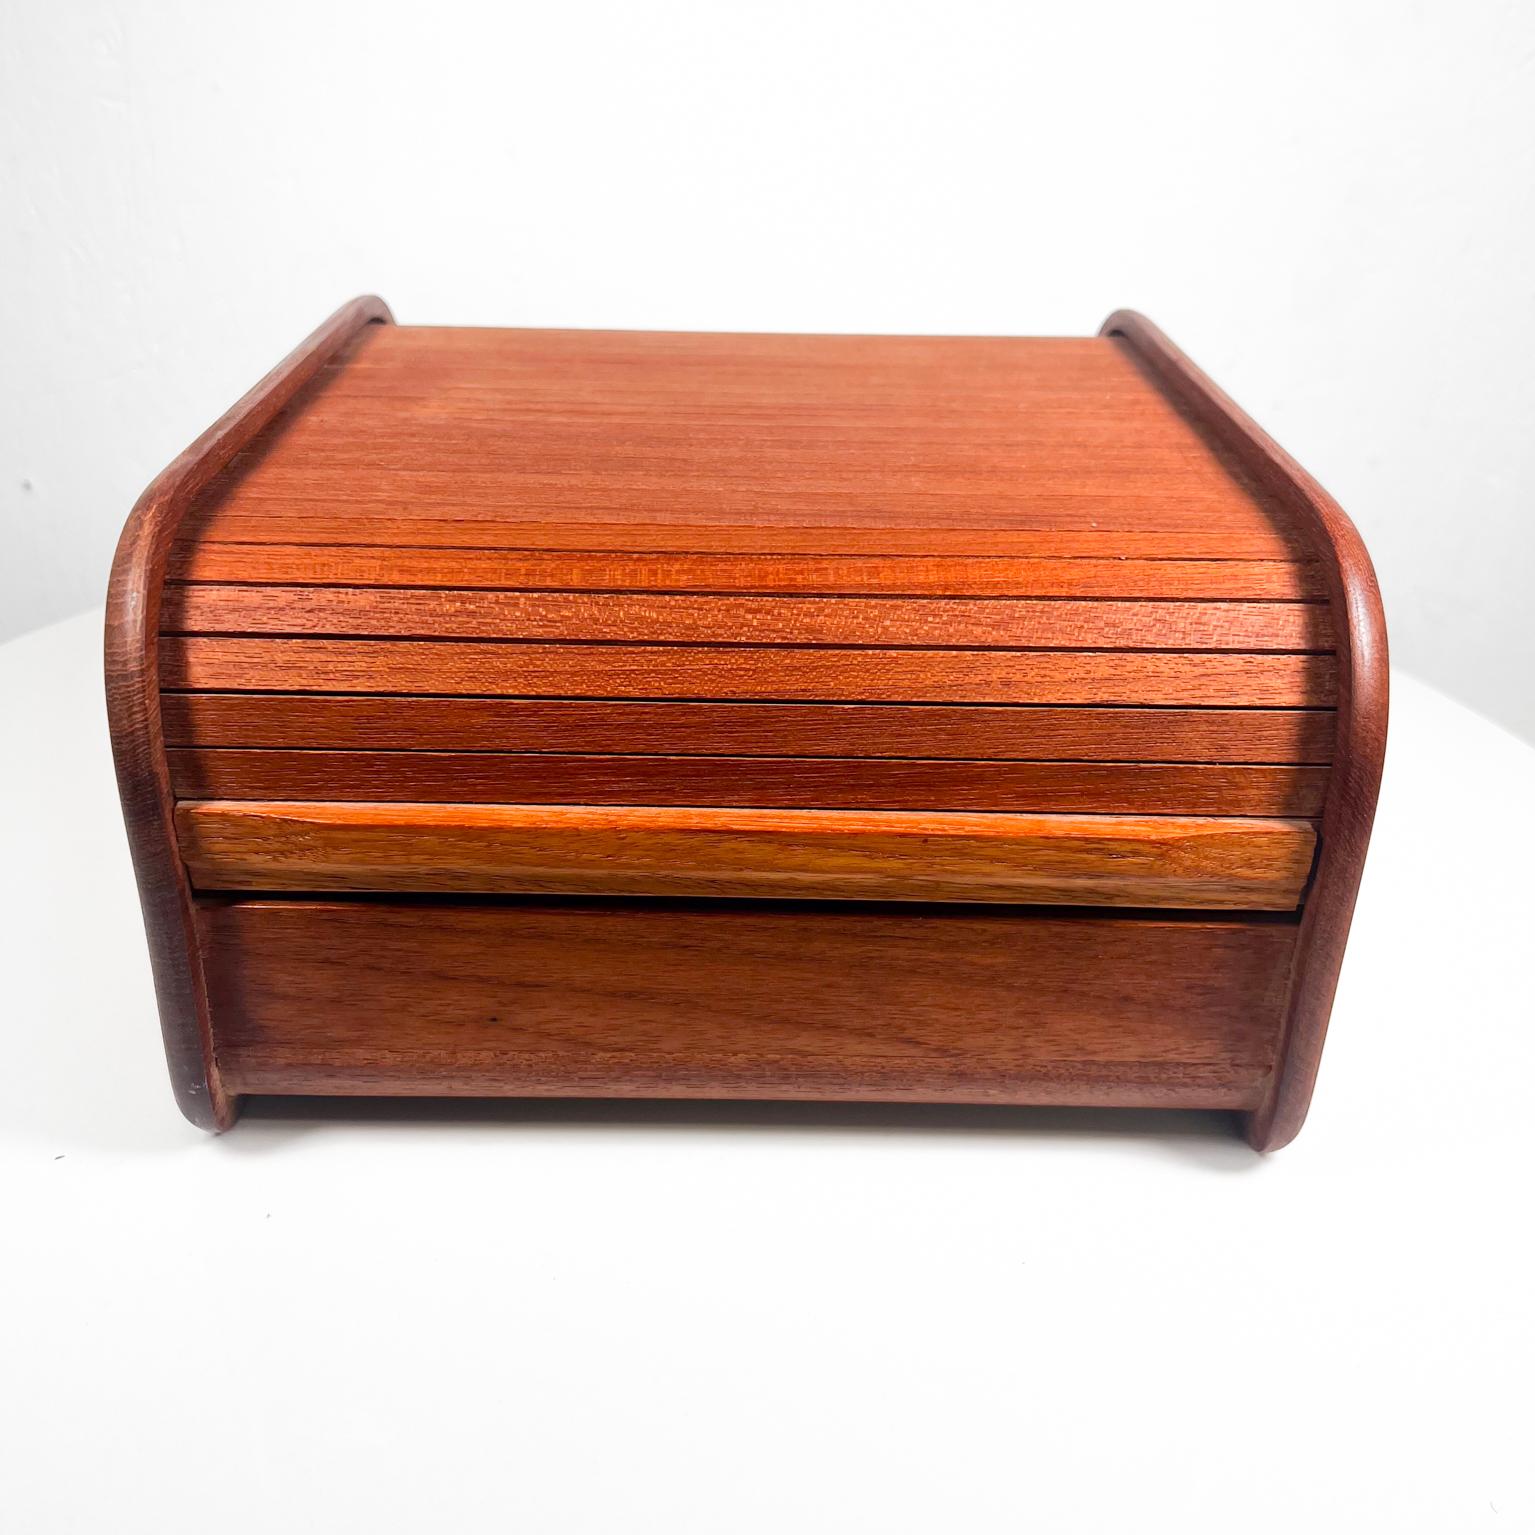 1960s Teak Tambour Door Storage Sectioned File Box
9.75 w x 10.63 d x 5.63 H
Center partition
Original vintage condition.
See all images.